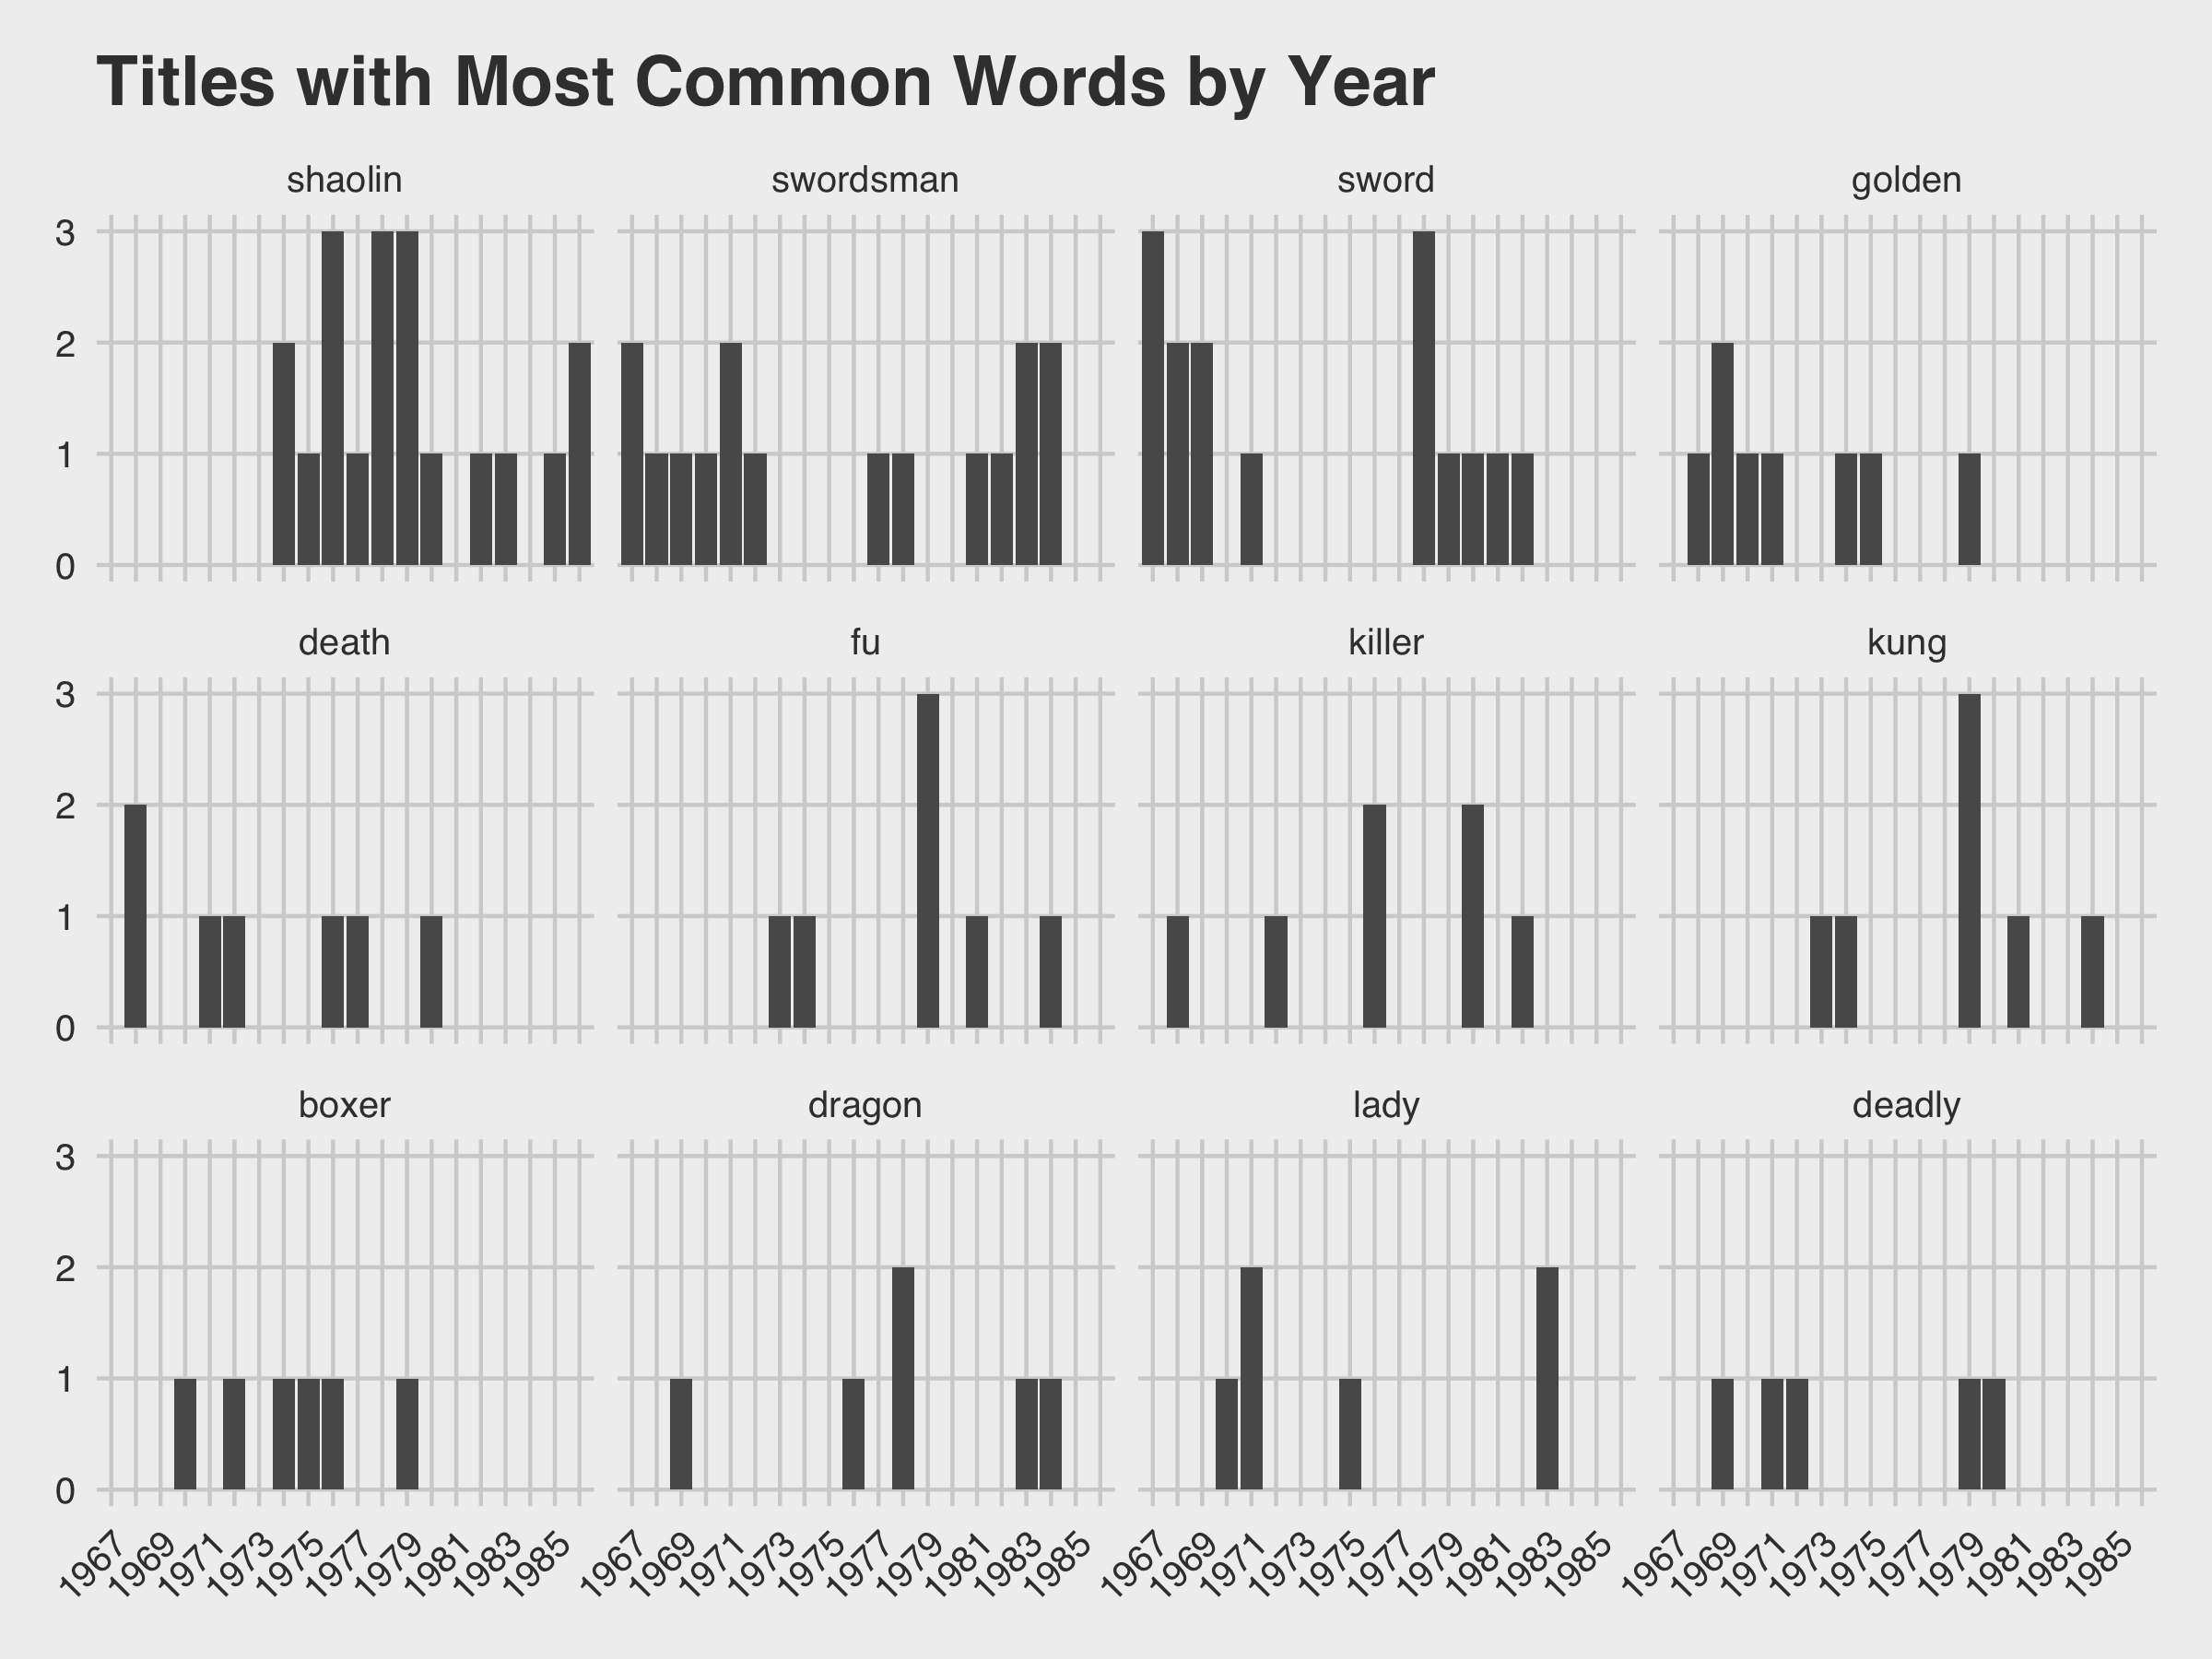 Top Words in Titles over time